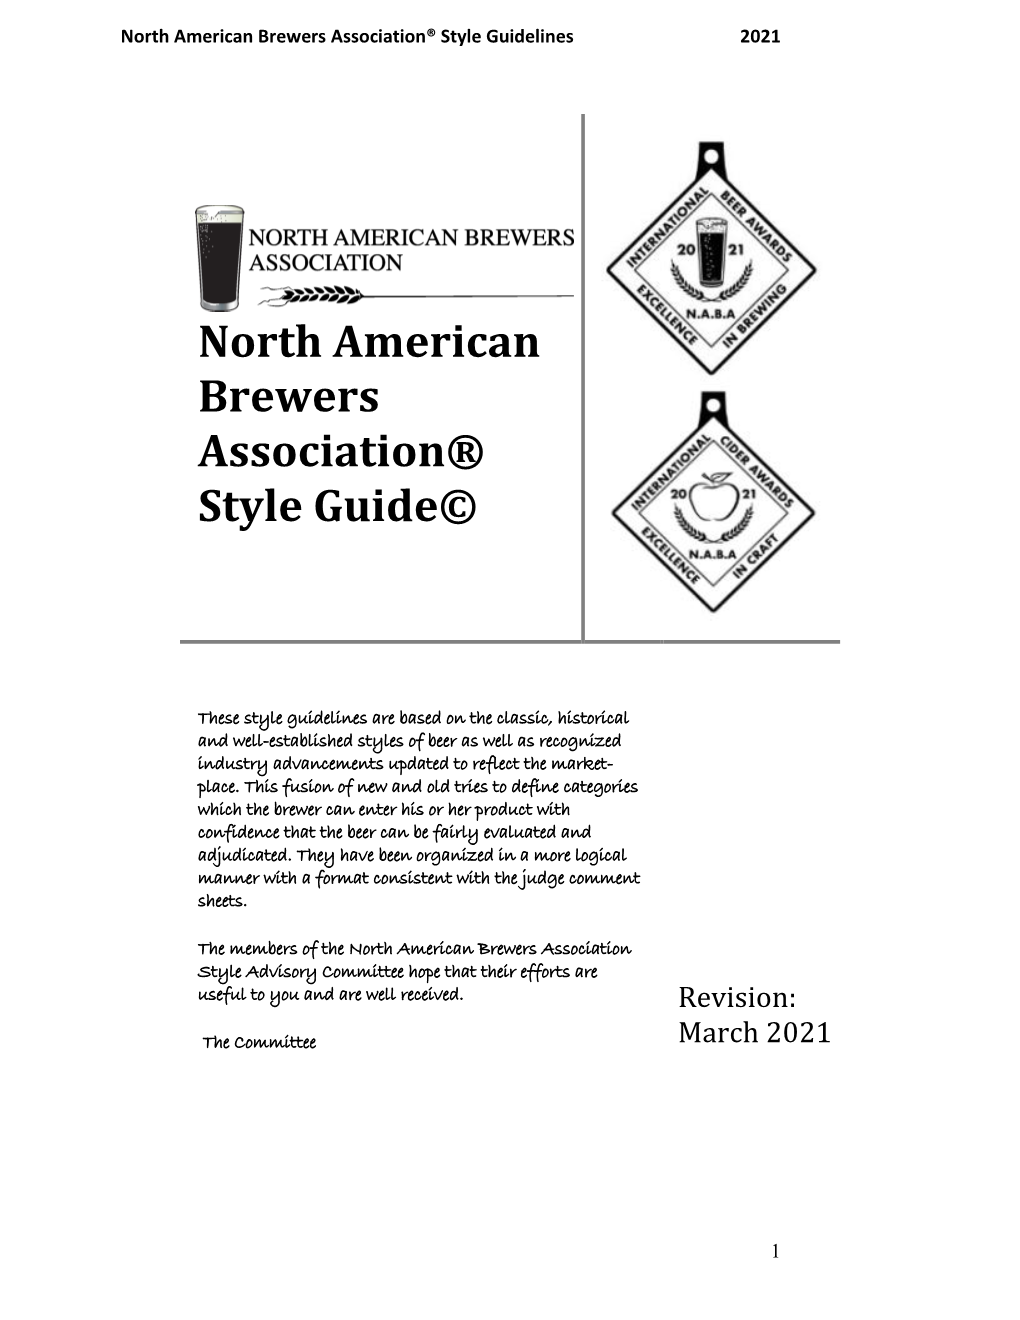 North American Brewers Association® Style Guide©